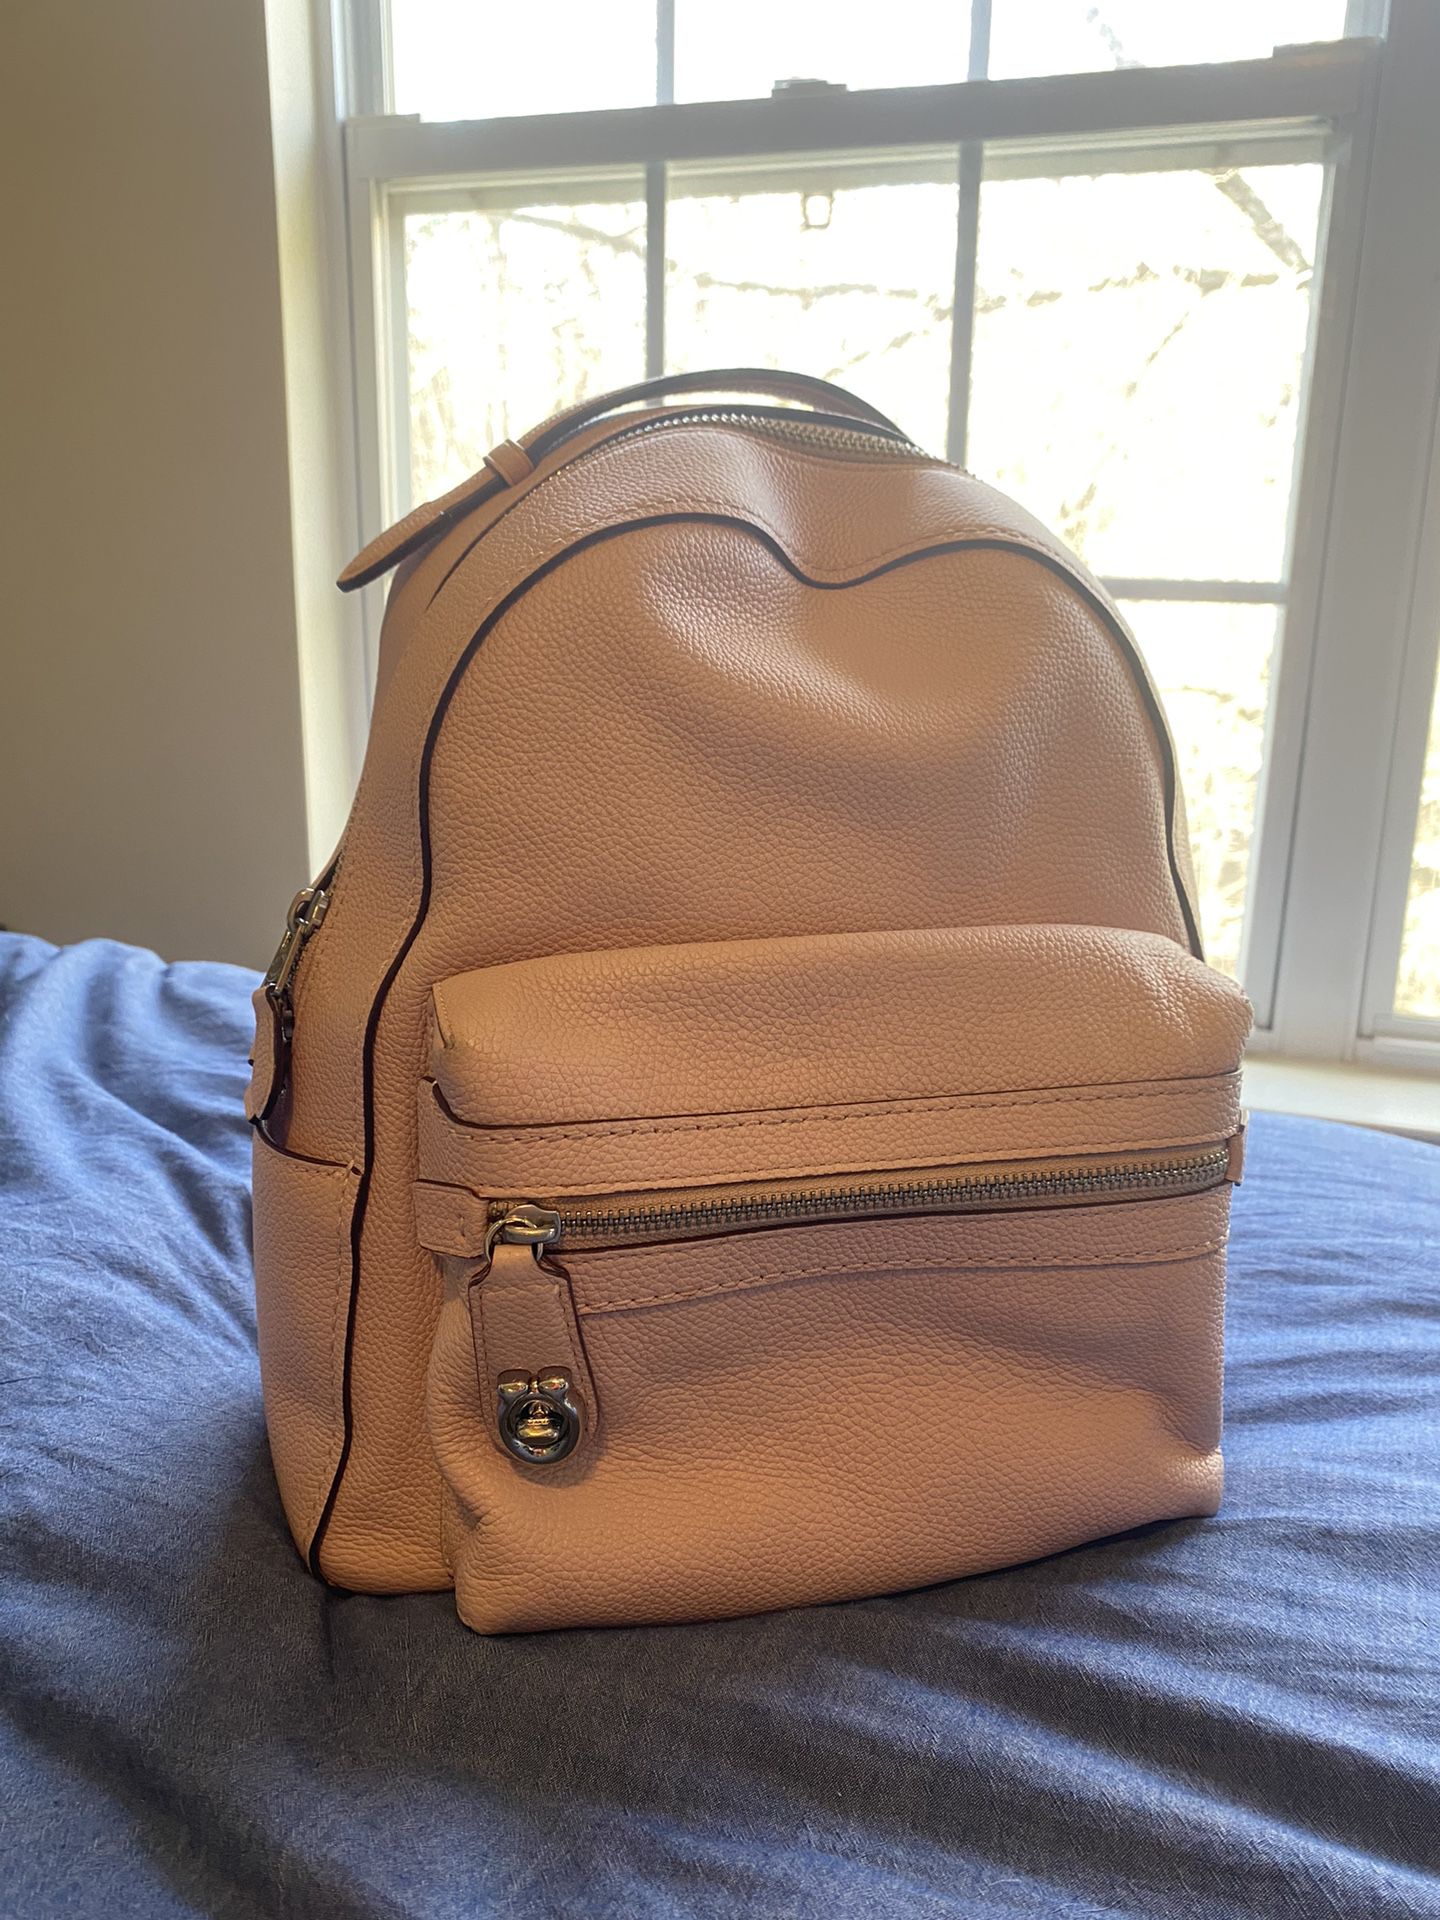 Coach Backpack purse, Light Pink, Genuine Leather.